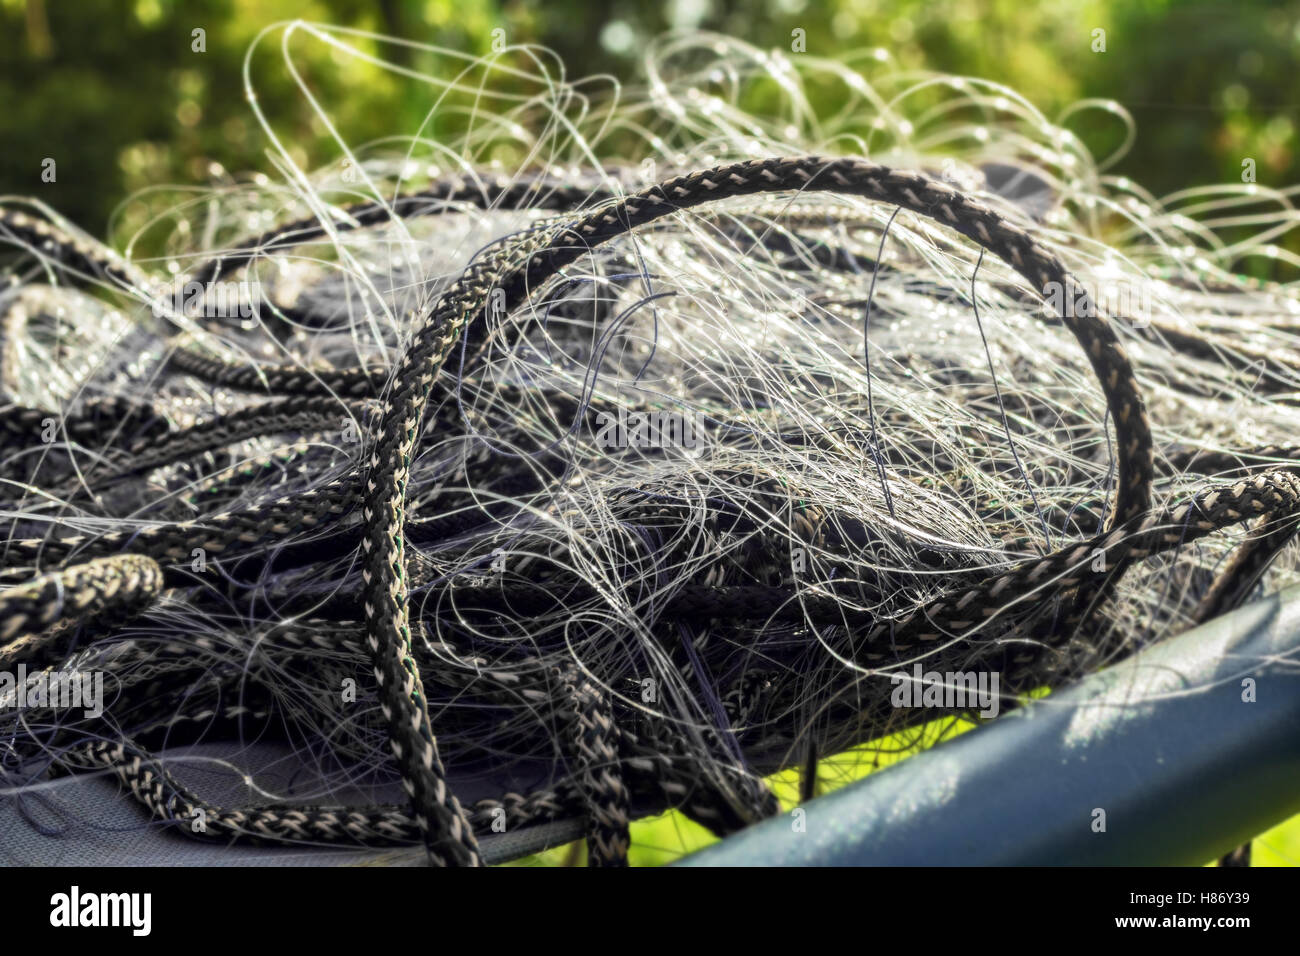 https://c8.alamy.com/comp/H86Y39/nice-fishing-nets-for-happy-hours-of-relax-H86Y39.jpg